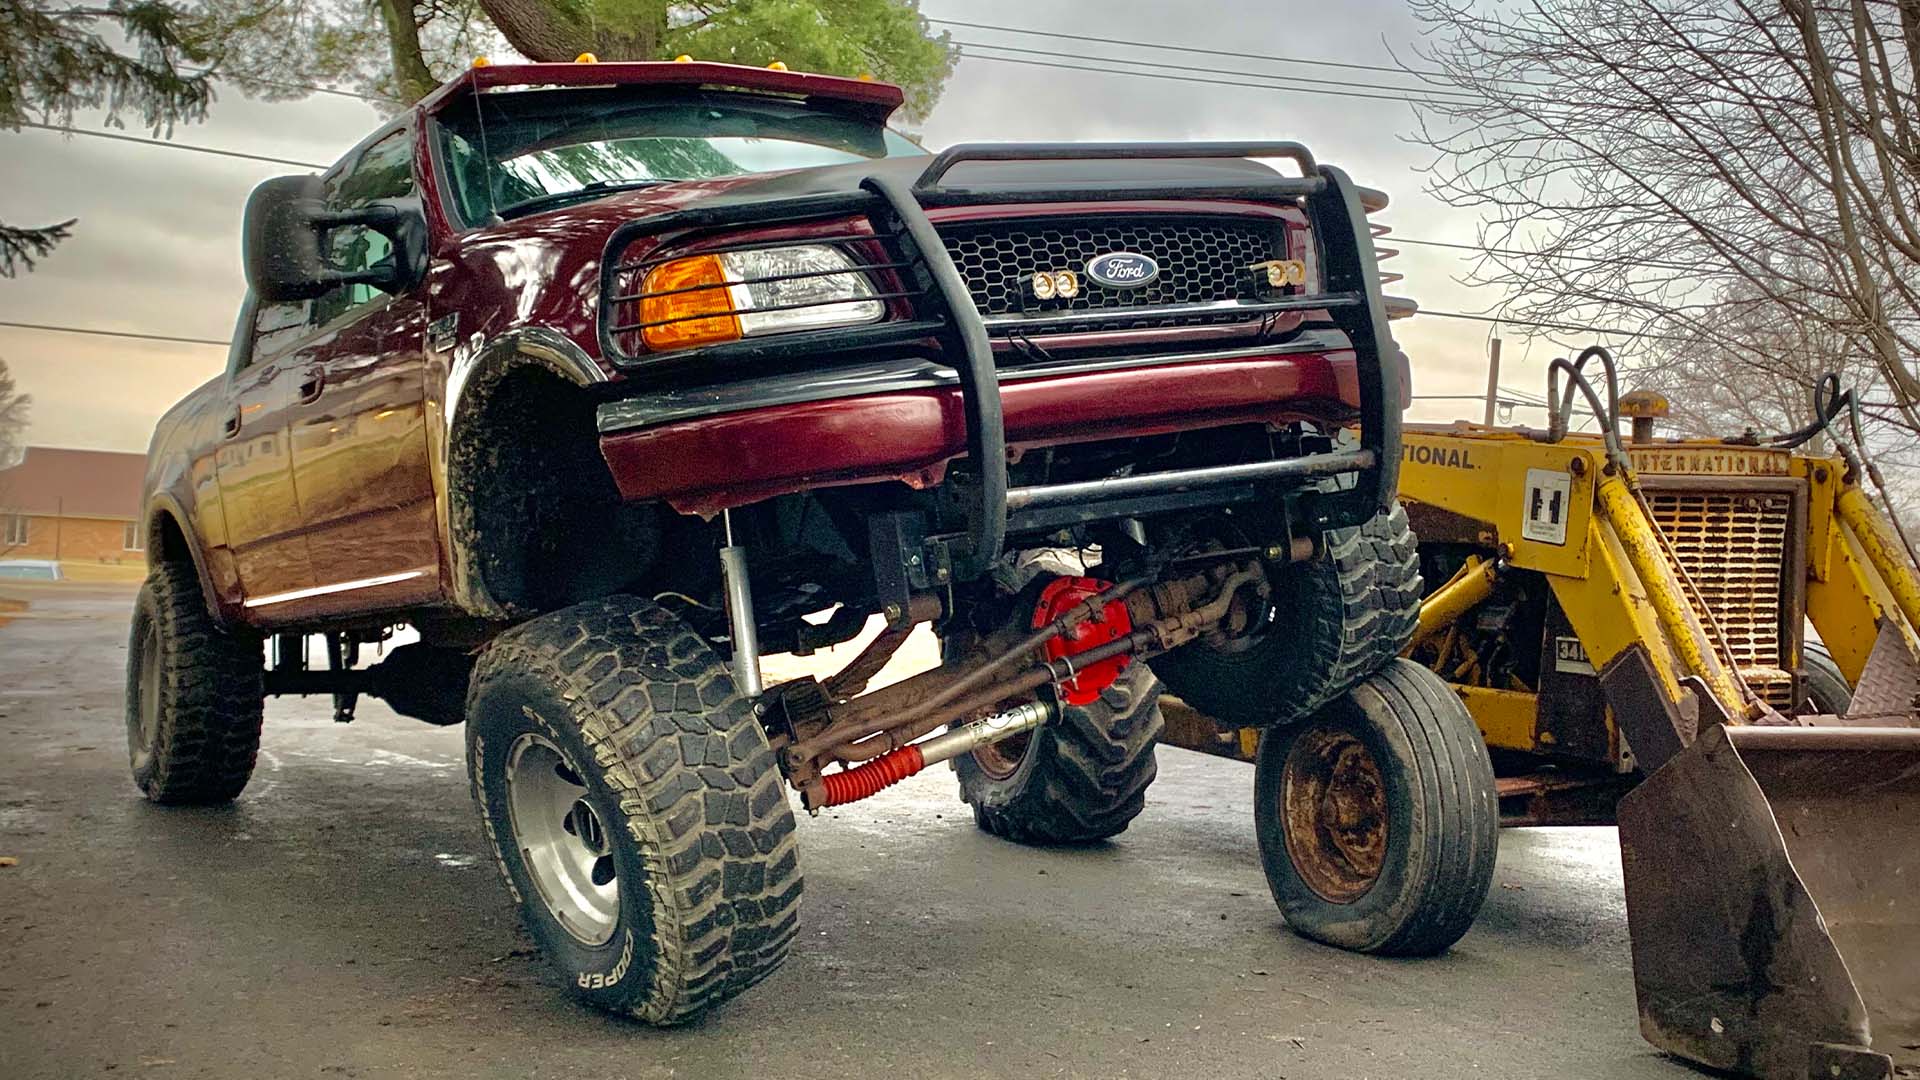 This Garage-Built ‘F-12350’ Ford Truck Has One-Ton Axles and a ZF6 Stick Shift